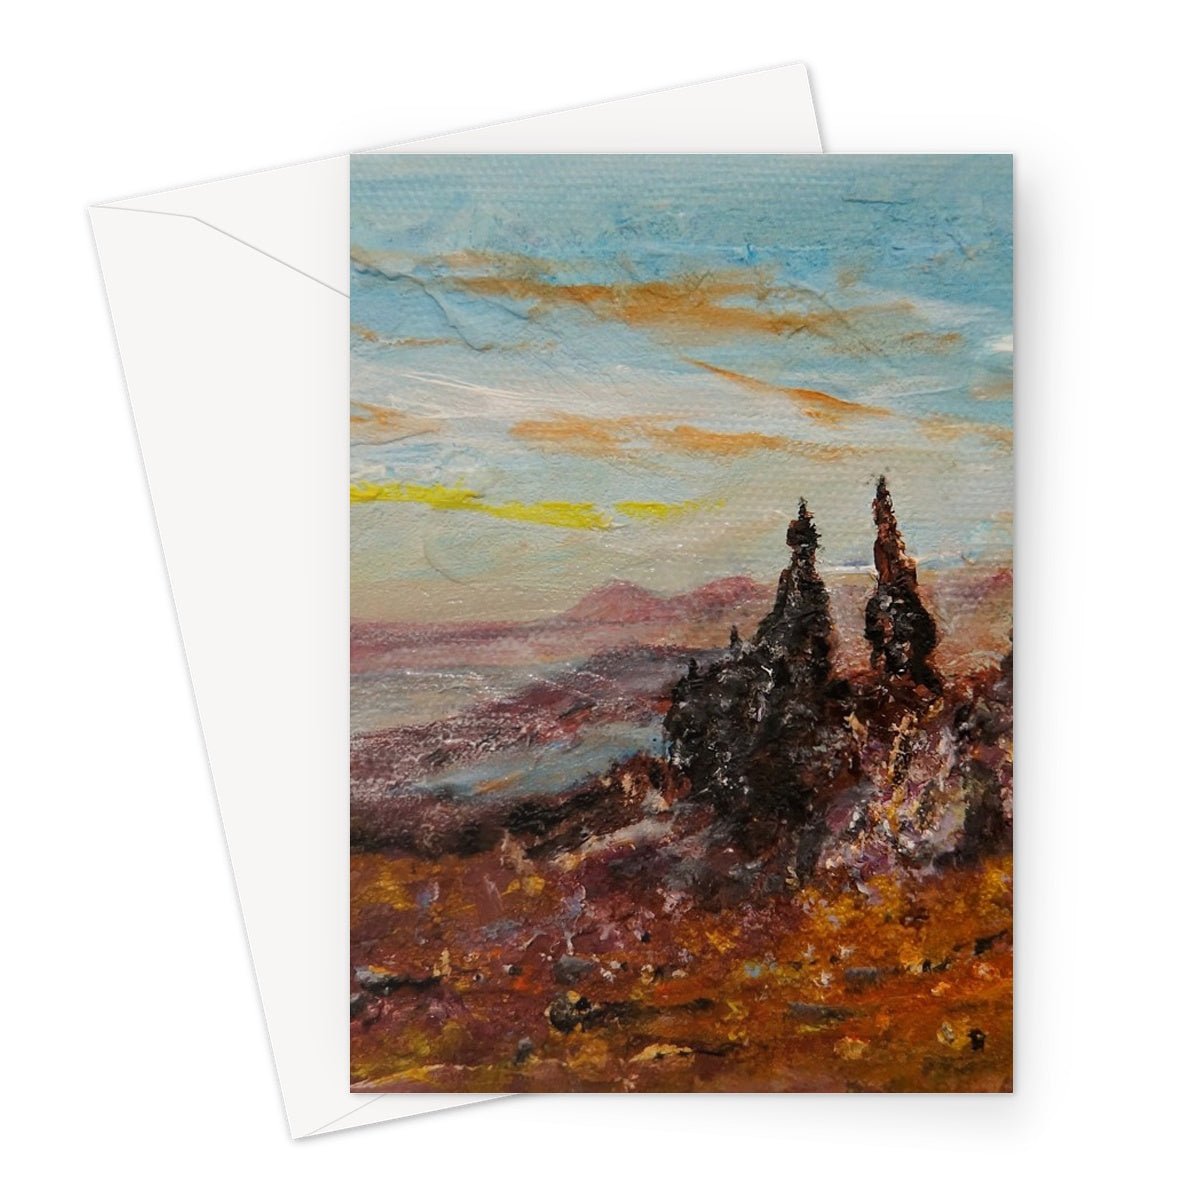 The Old Man Of Storr Skye Art Gifts Greeting Card-Greetings Cards-Skye Art Gallery-A5 Portrait-1 Card-Paintings, Prints, Homeware, Art Gifts From Scotland By Scottish Artist Kevin Hunter